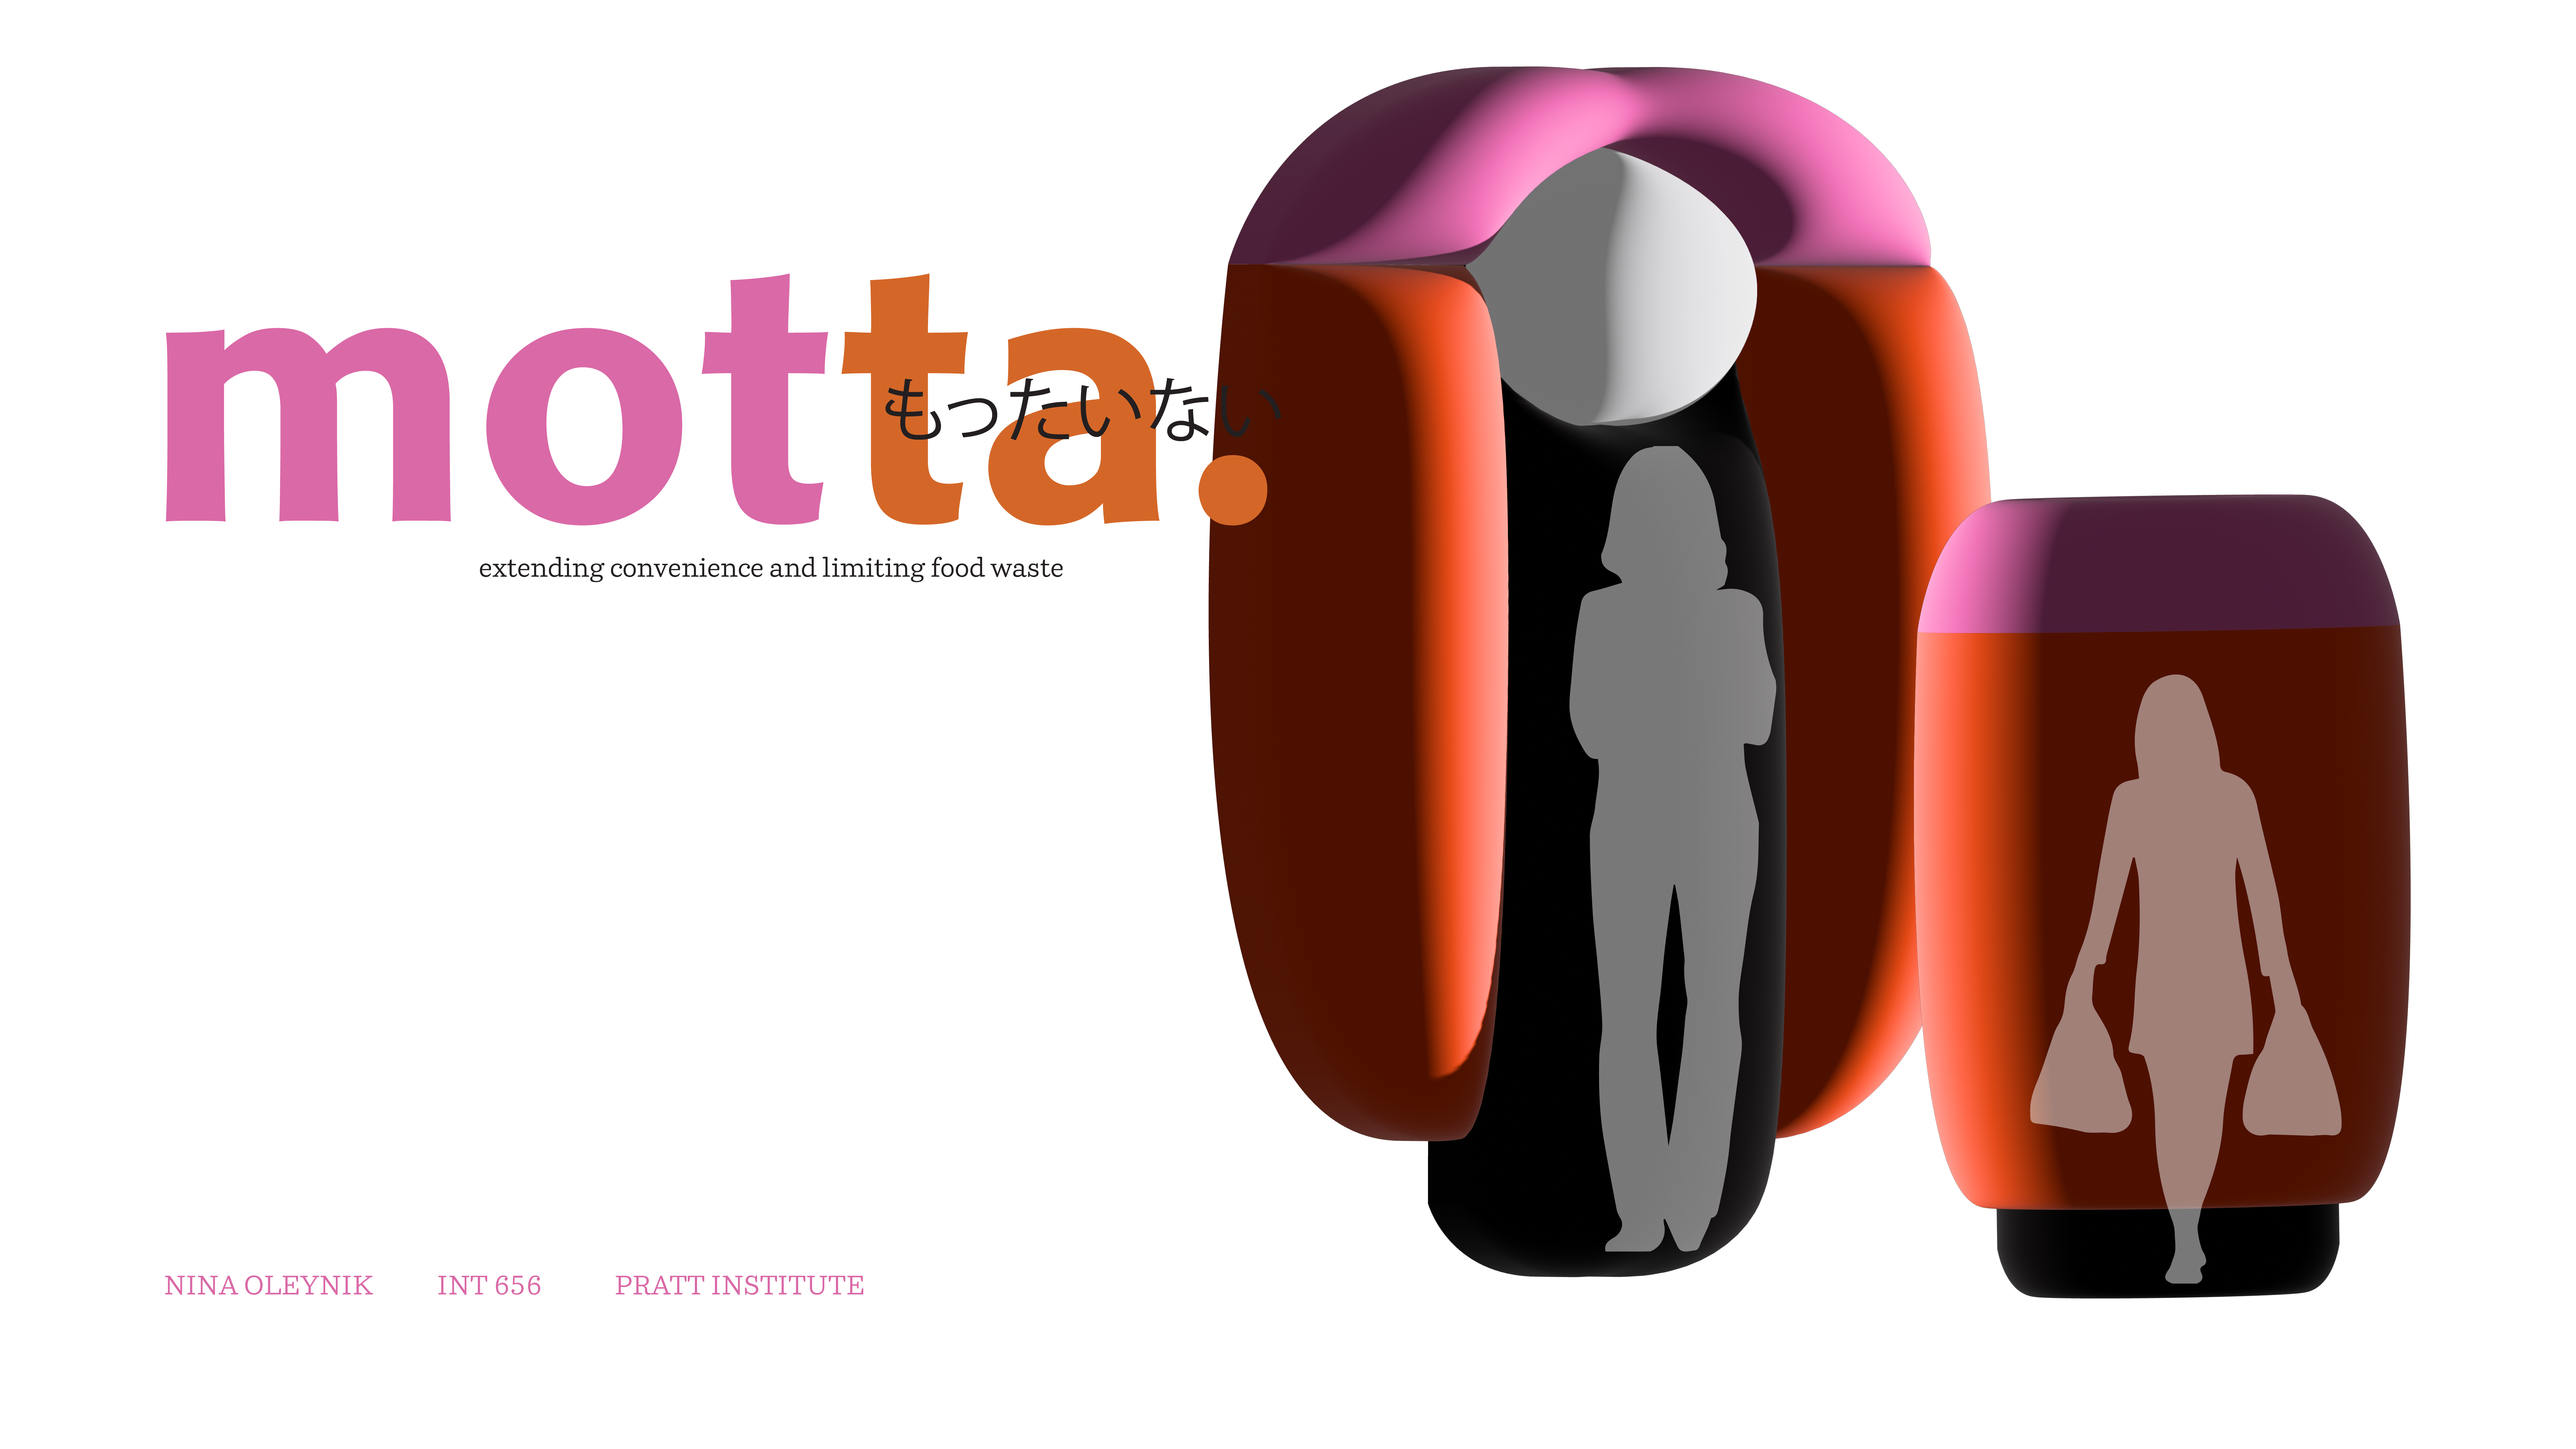 Motta Booth: Extending Convenience and Limiting Food Waste